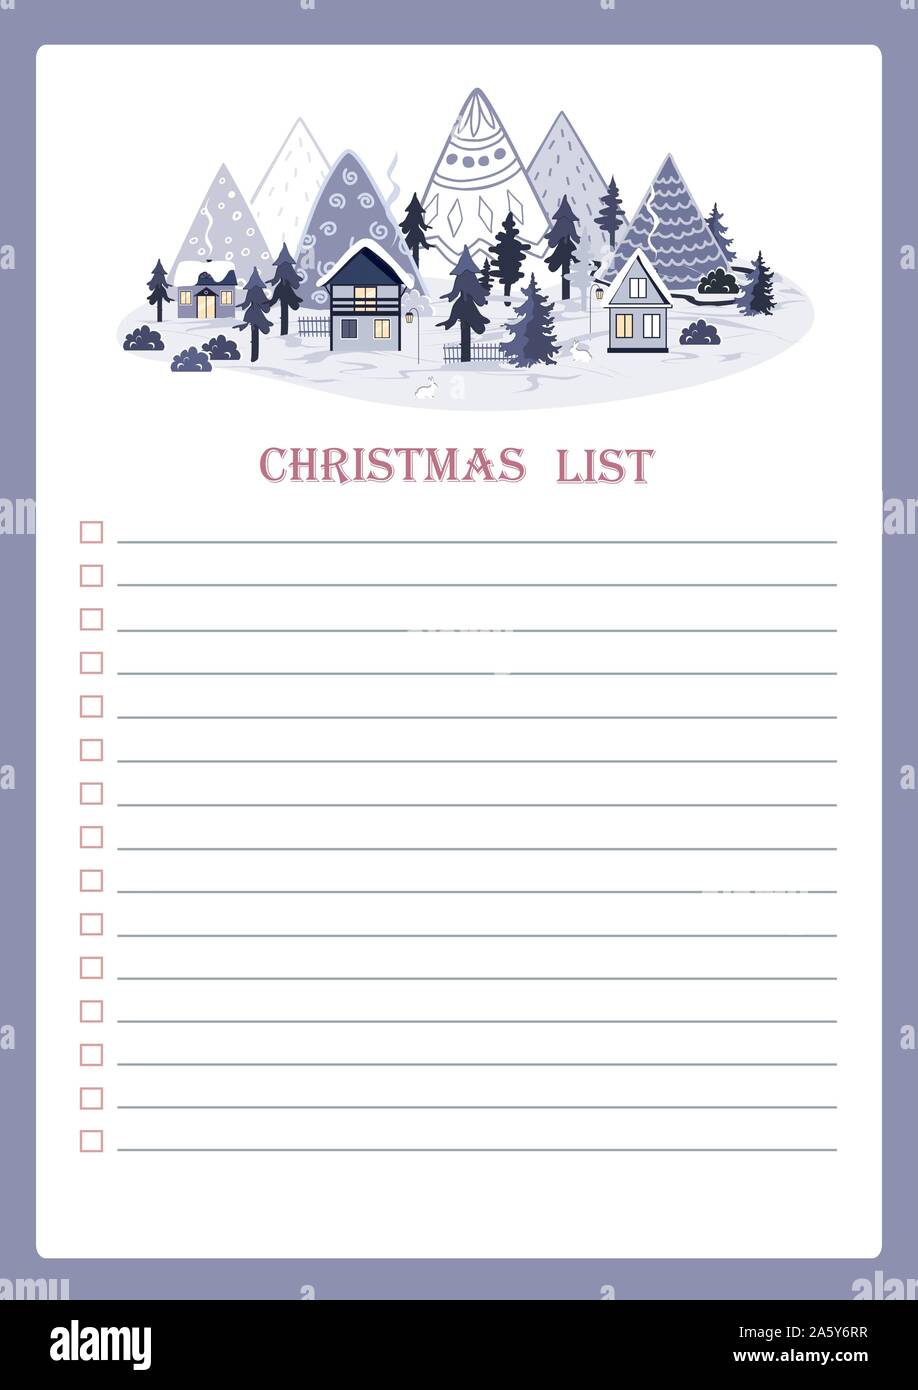 Vector template for Christmas to do list with cartoon winter mountains and houses landscape Stock Vector